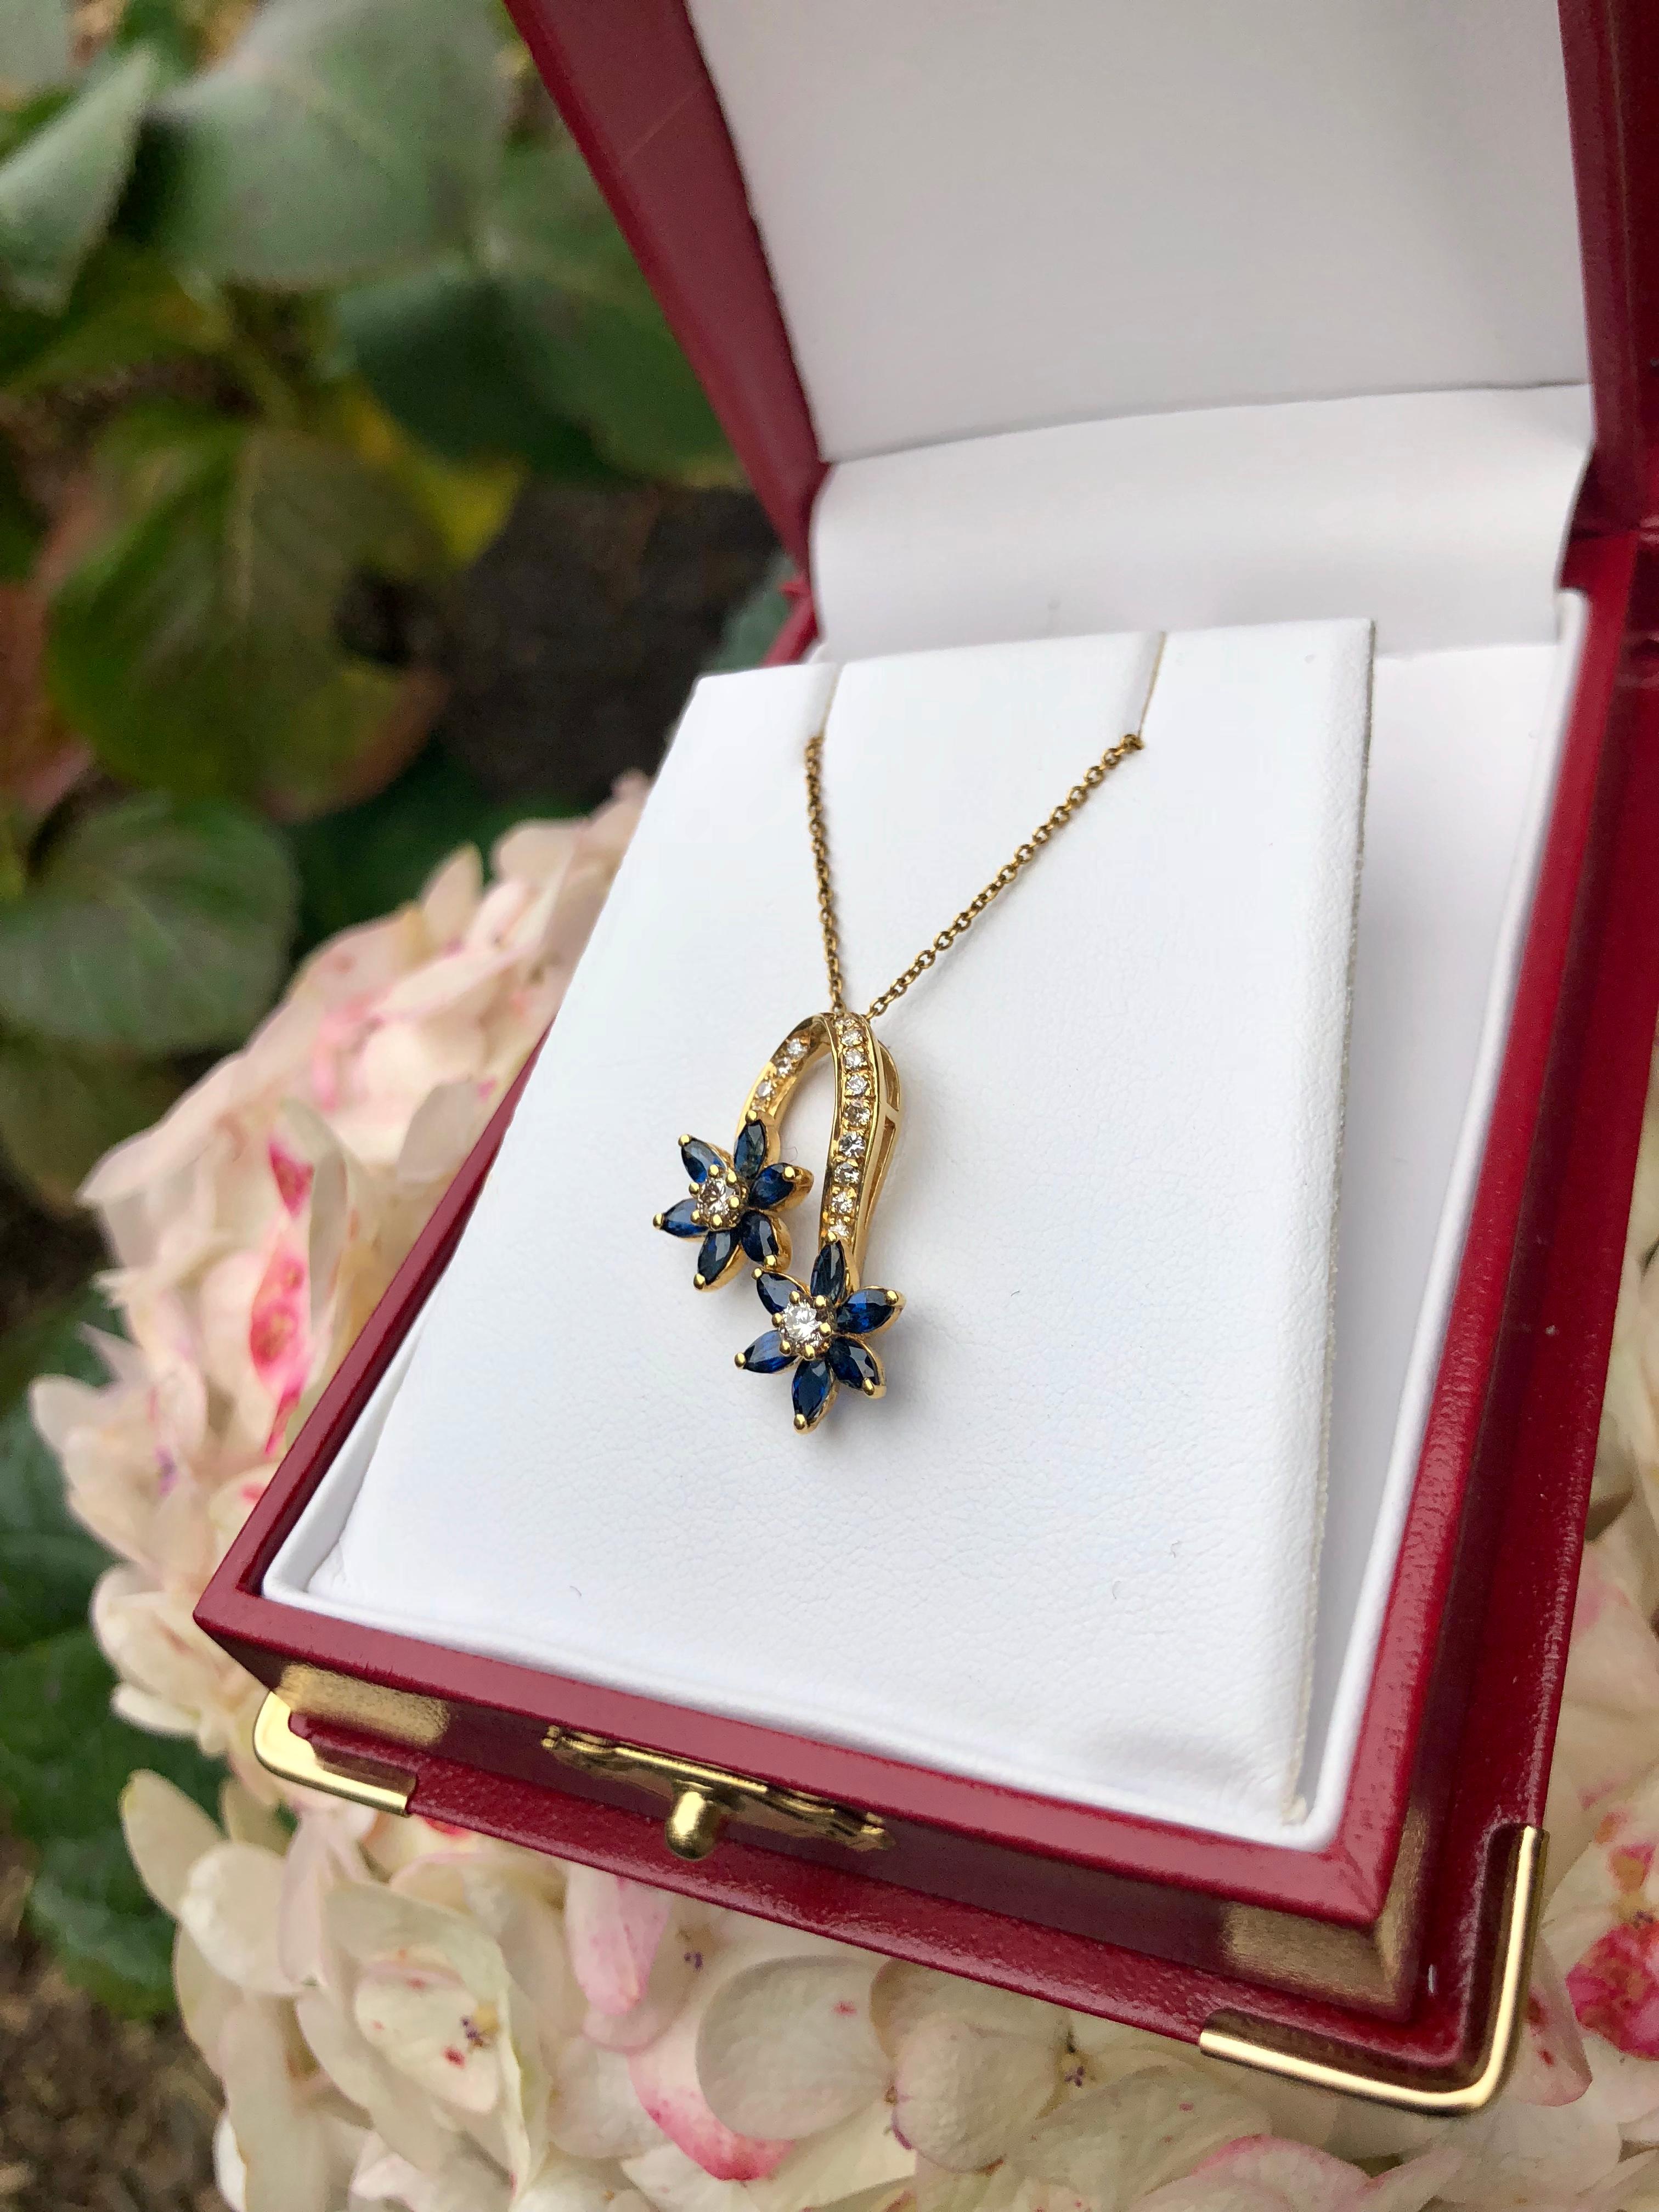 Contemporary Playful Spinning Flowers Sapphire Diamond 18 Karat Yellow Gold Pendant on Chain For Sale